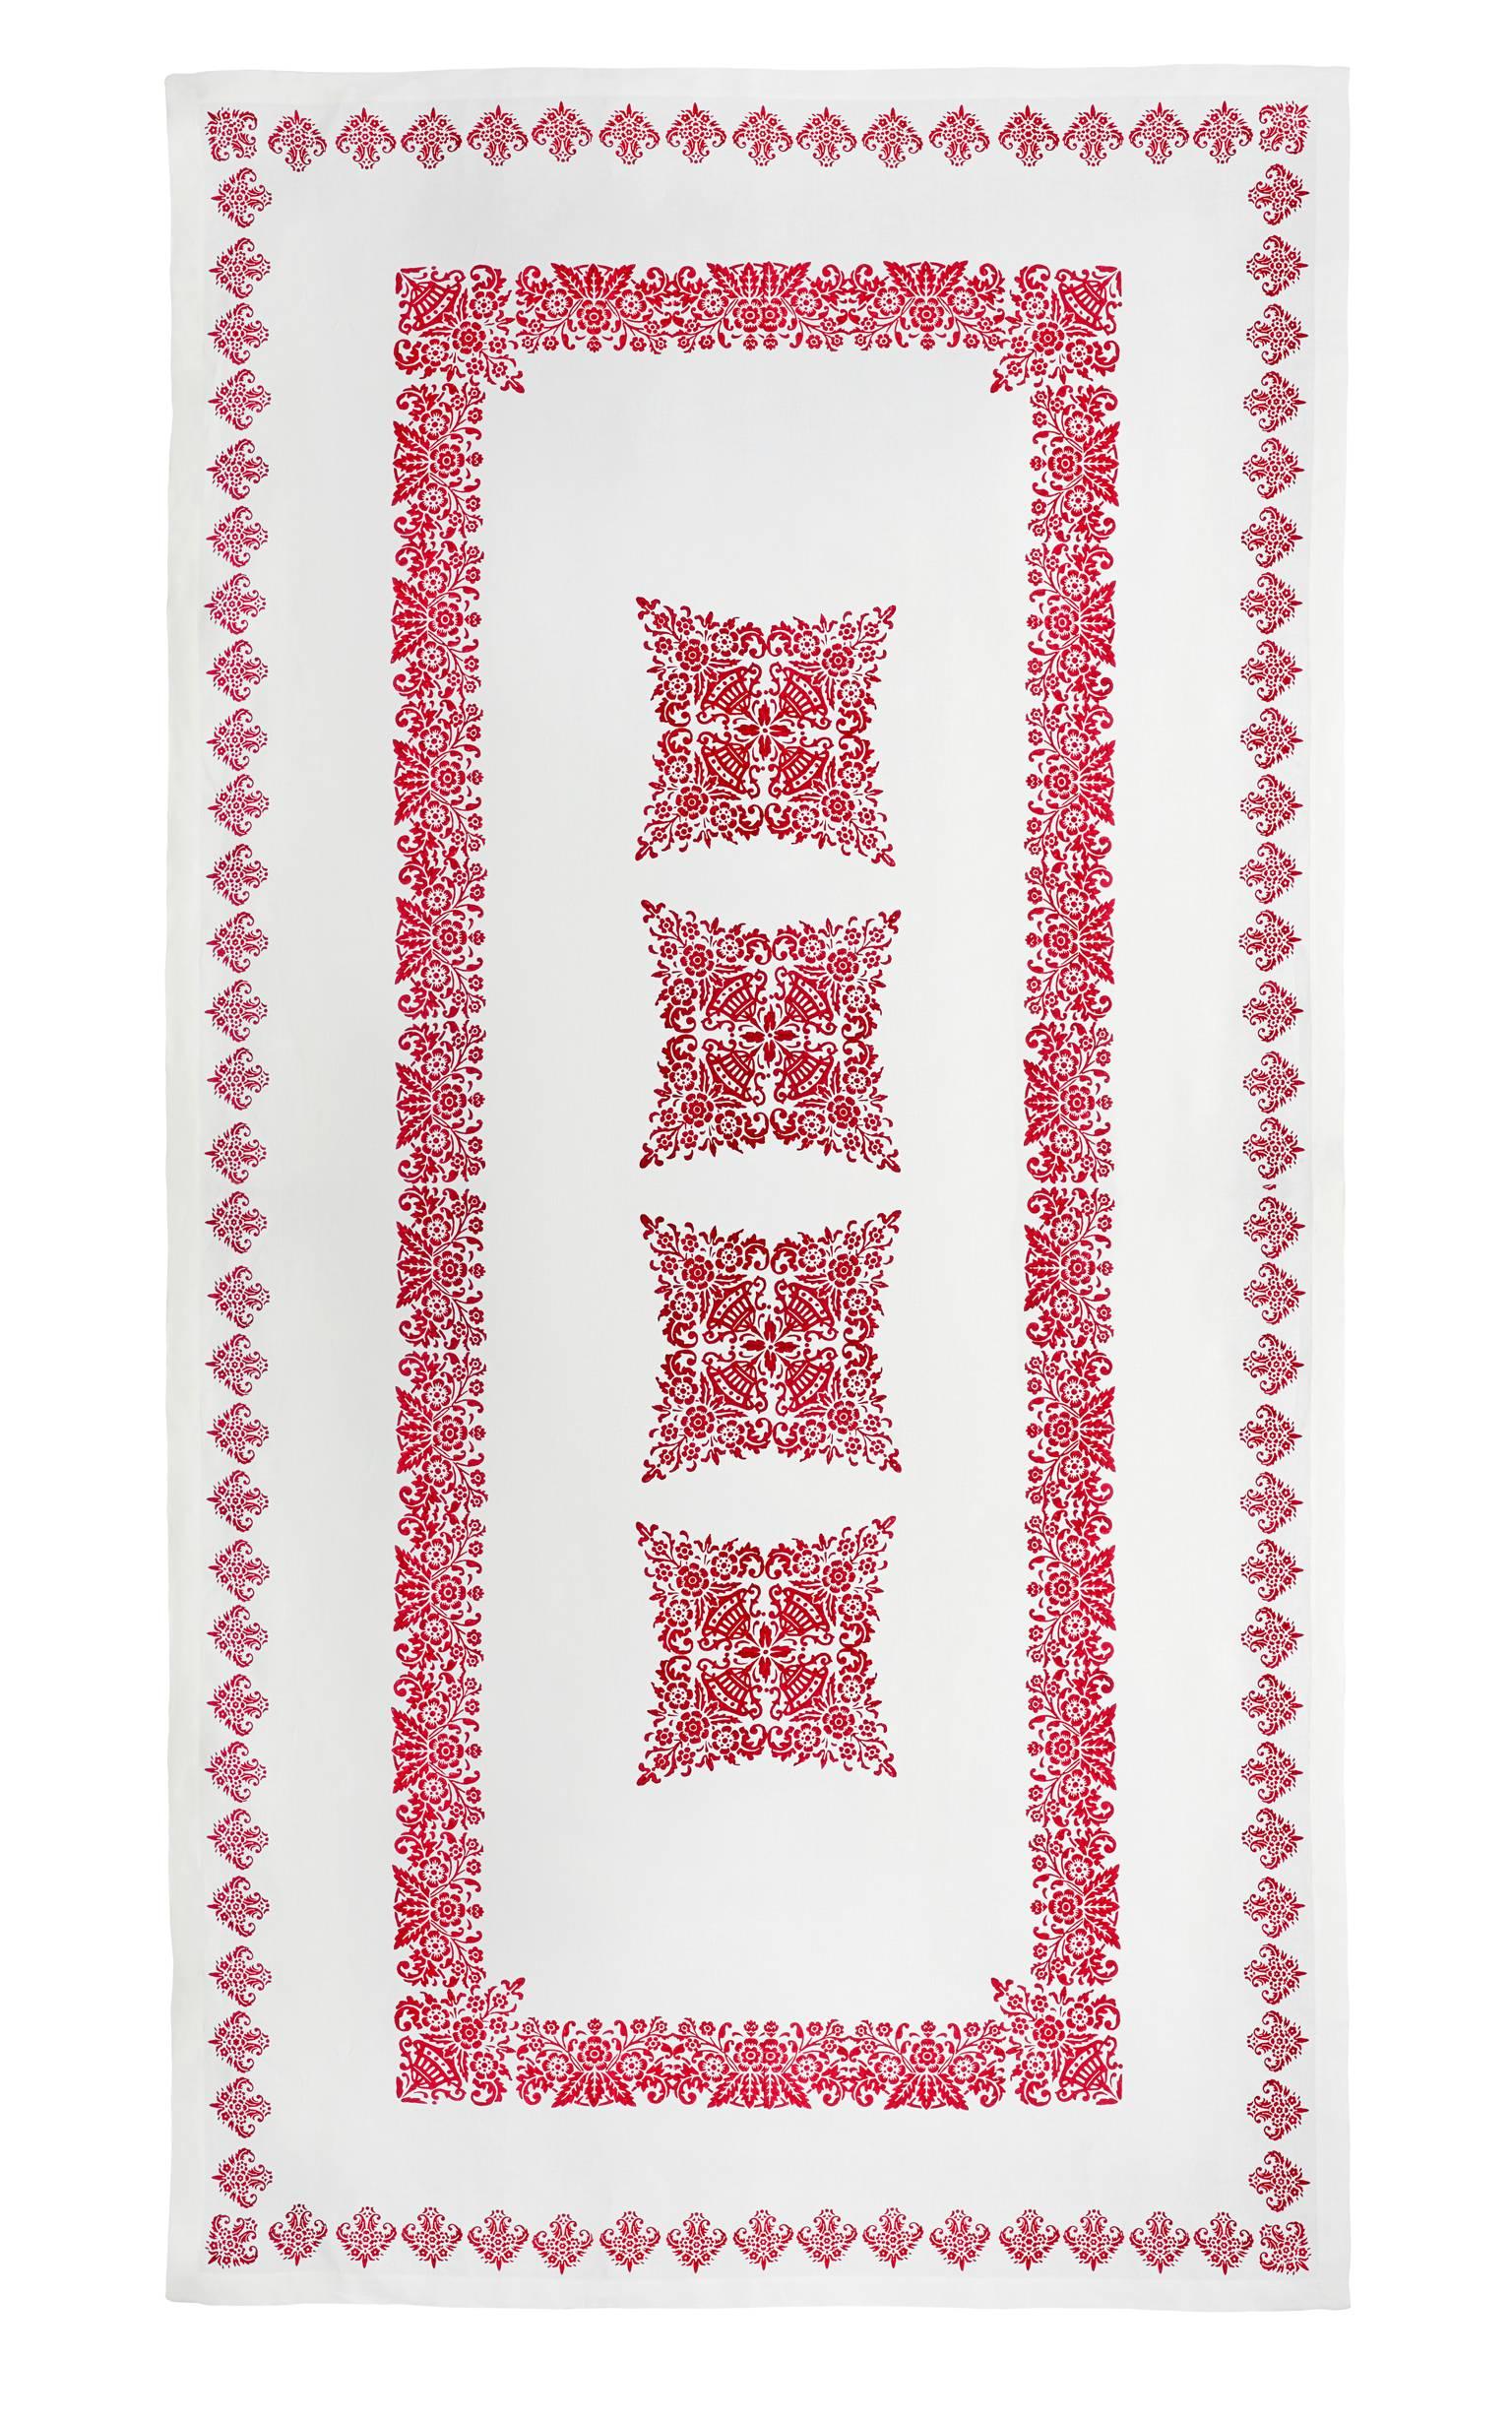 Red rectangular tablecloth in pure linen hand printed in Italy by Stamperia Bertozzi exclusively for Cabana. 

This hand printed Italian linen tablecloth has been created using the very finest pure white linen. The master artisan print house in